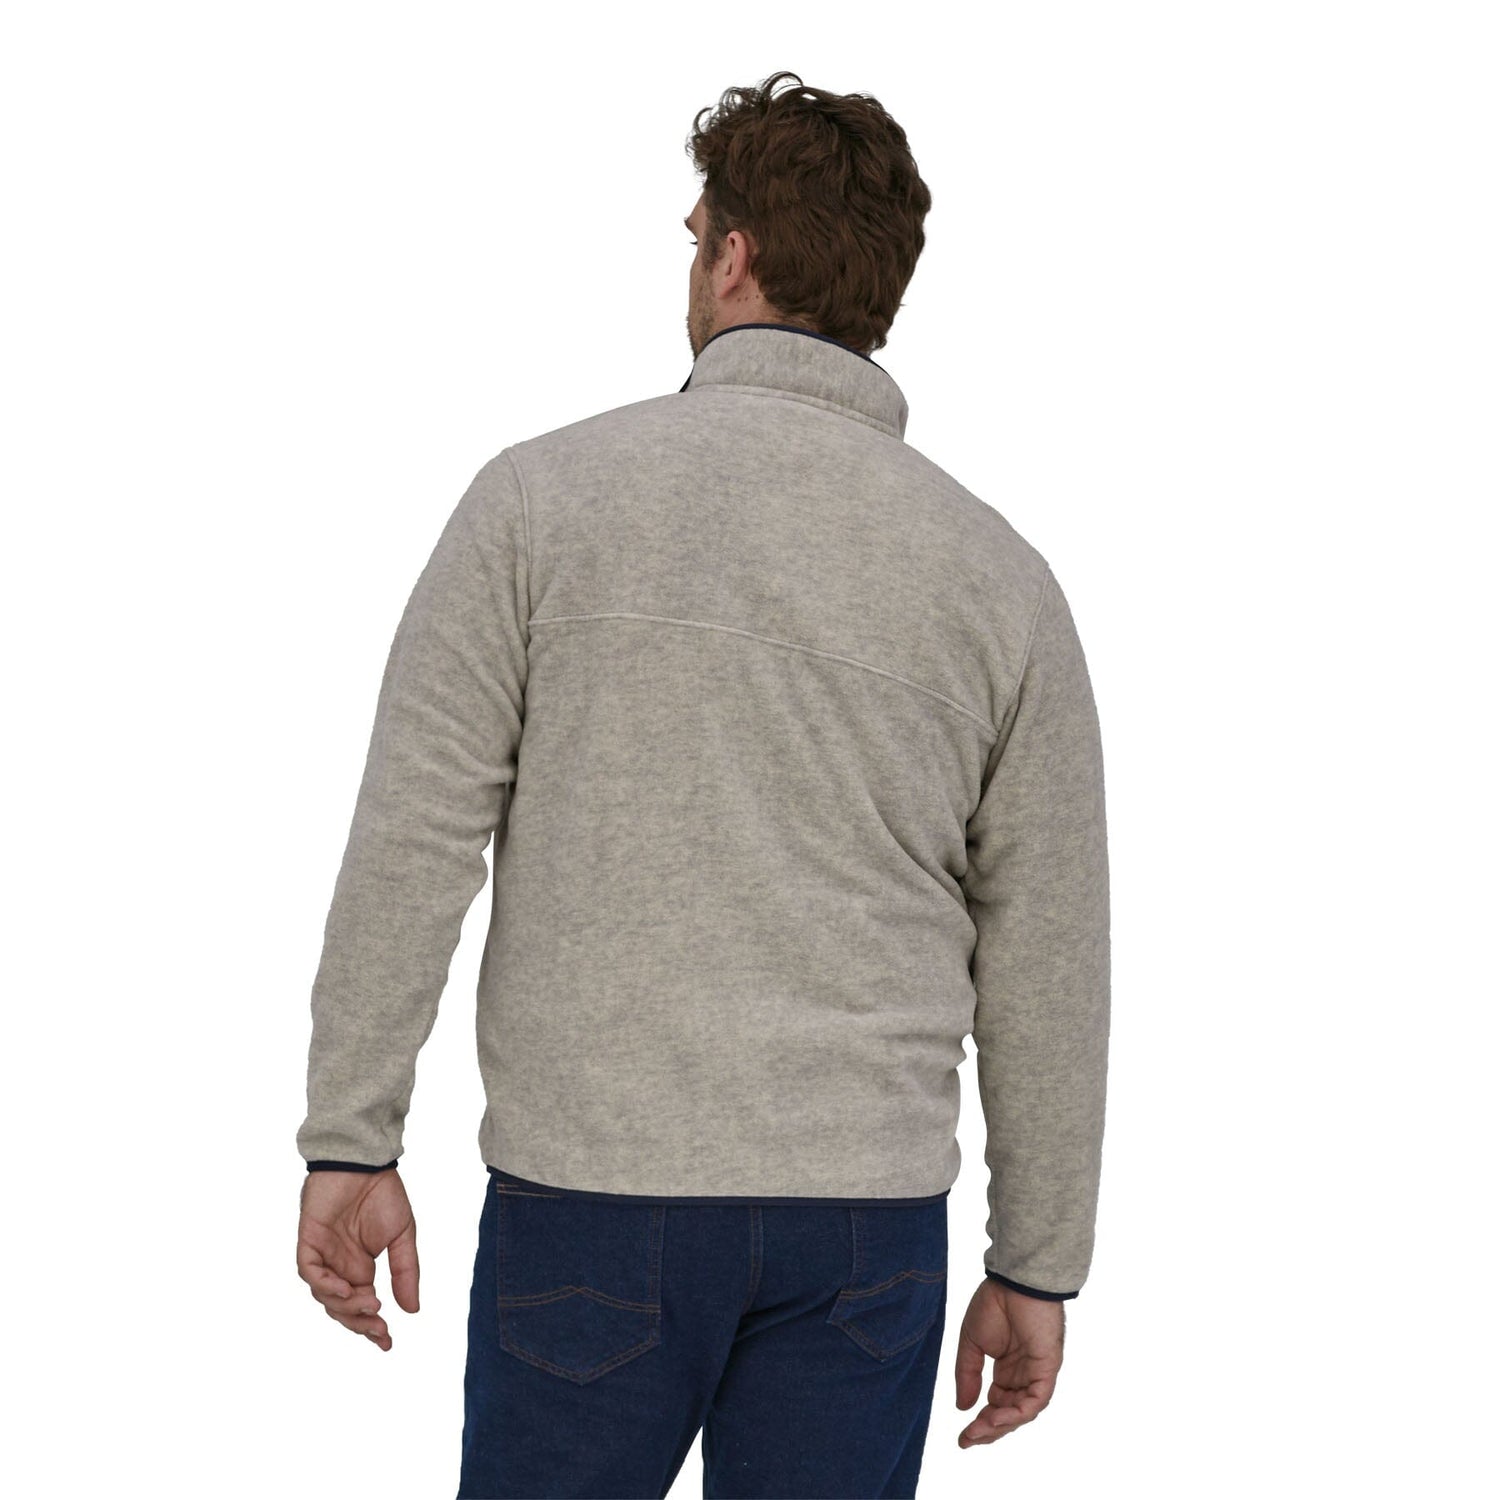 Patagonia M's LW Synch Snap-T Fleece Pullover - 100% Recycled Polyester Oatmeal Heather Shirt